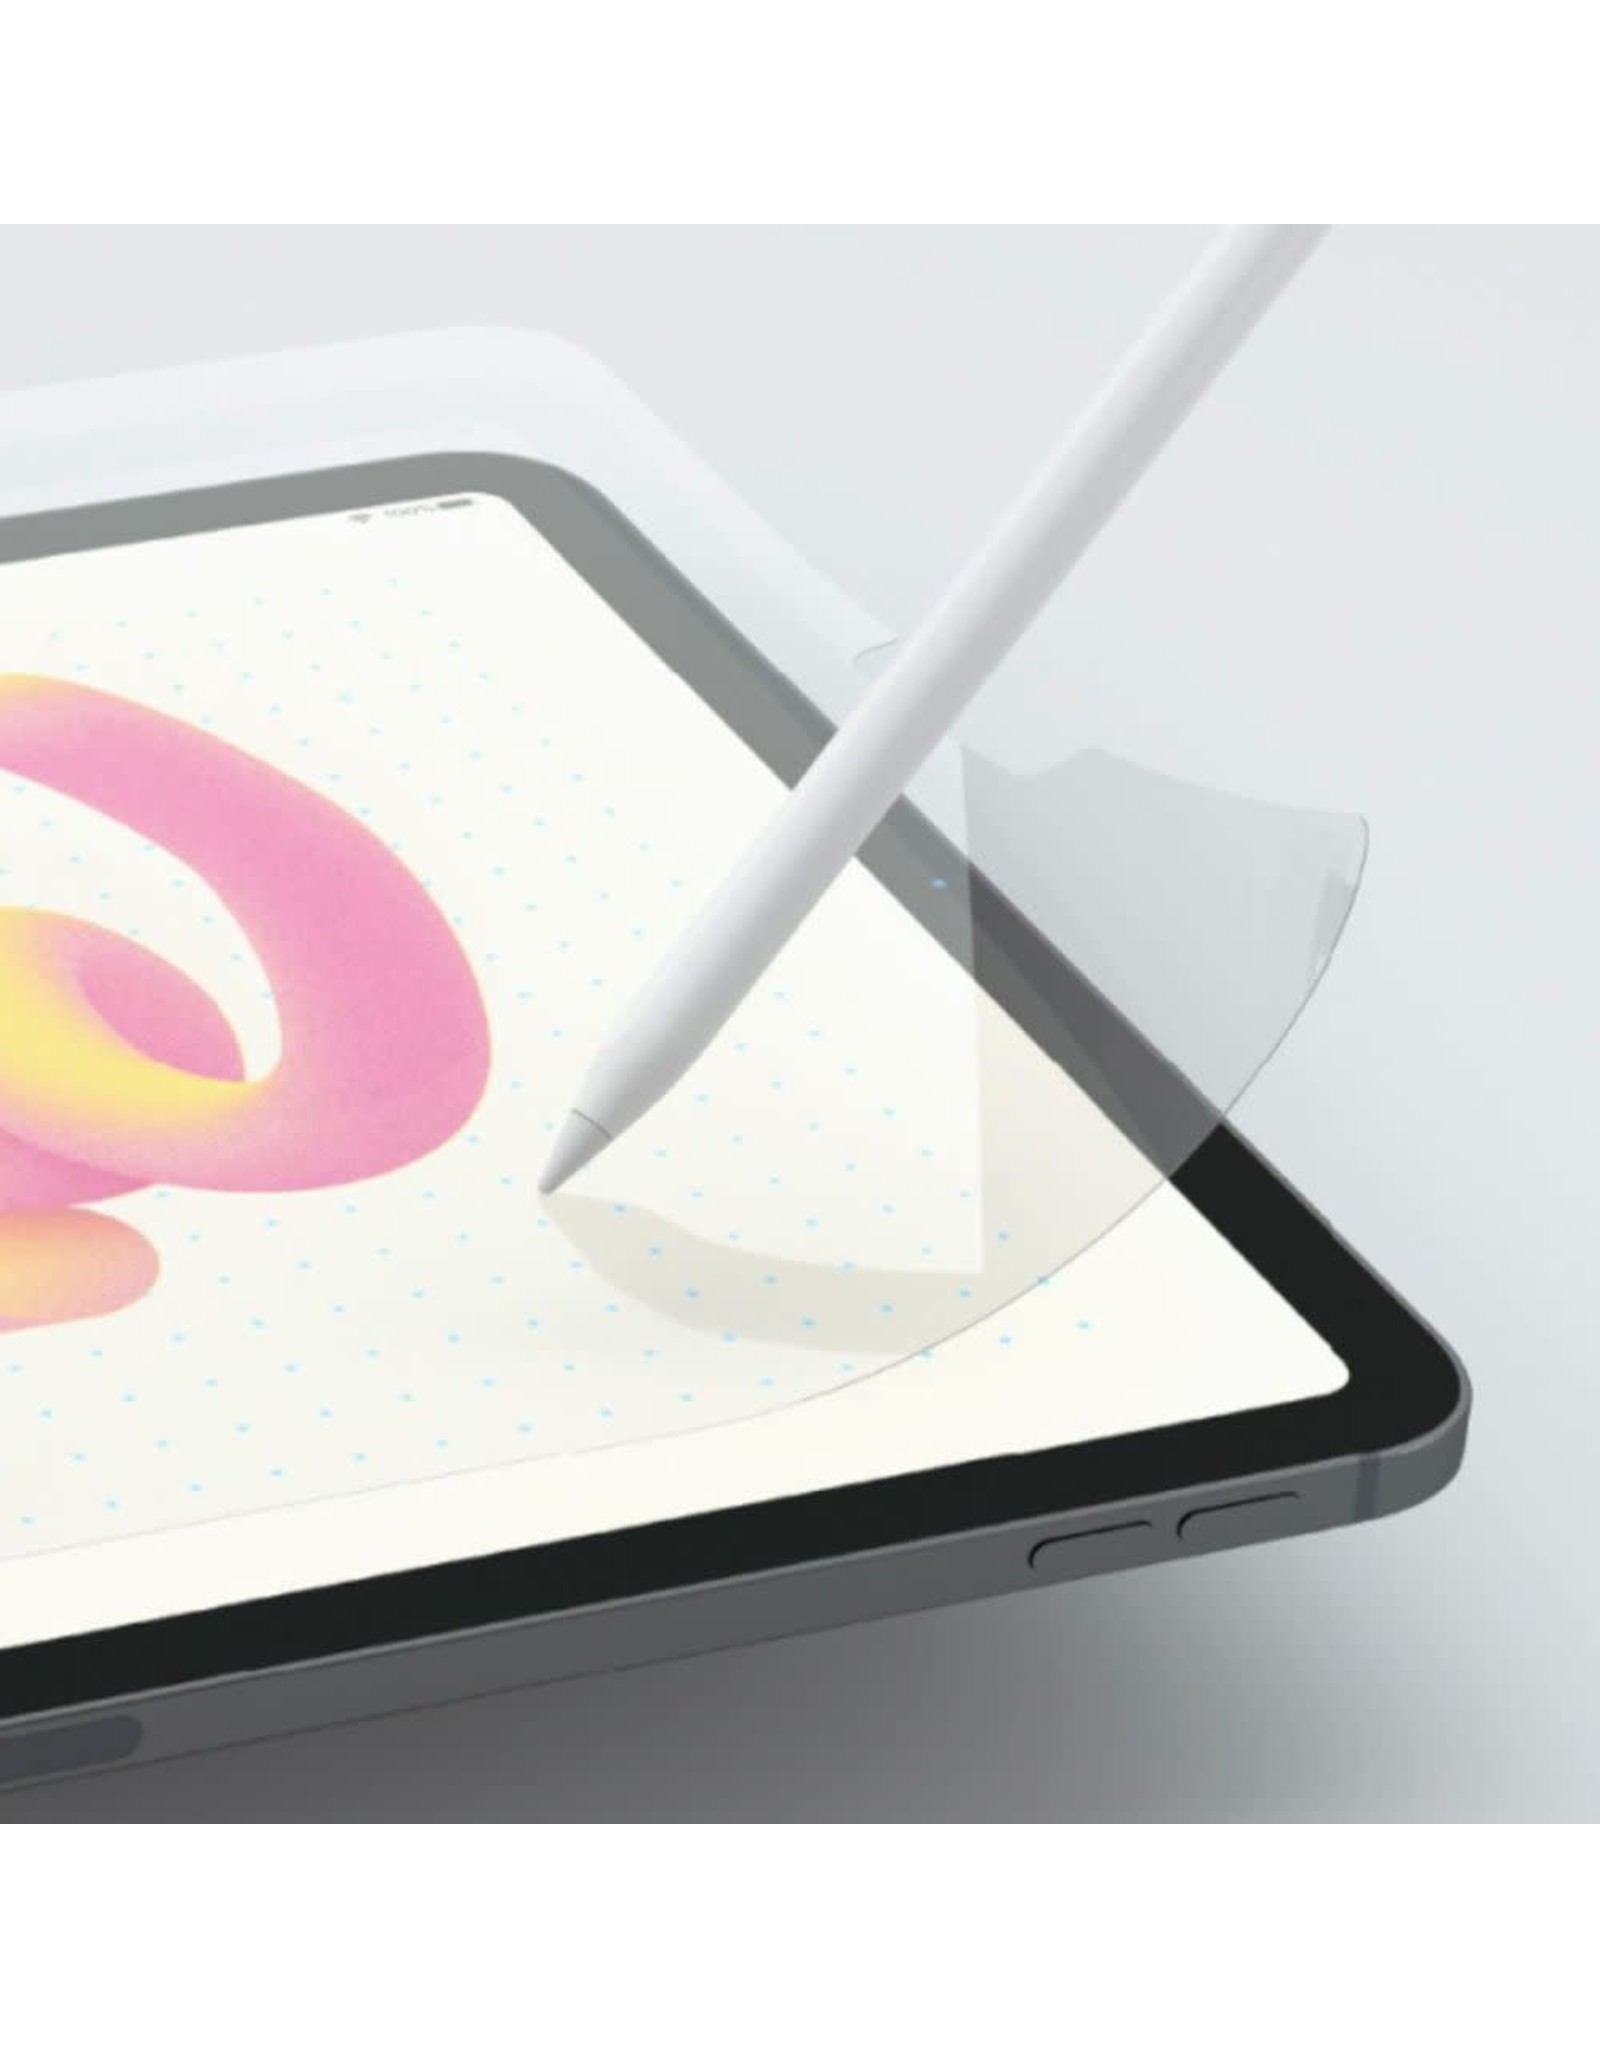 Paperlike Paperlike Screen Protector (v2.1) for iPad Pro 12.9" (2018/20/21/22) for Writing & Drawing (x2 pack)